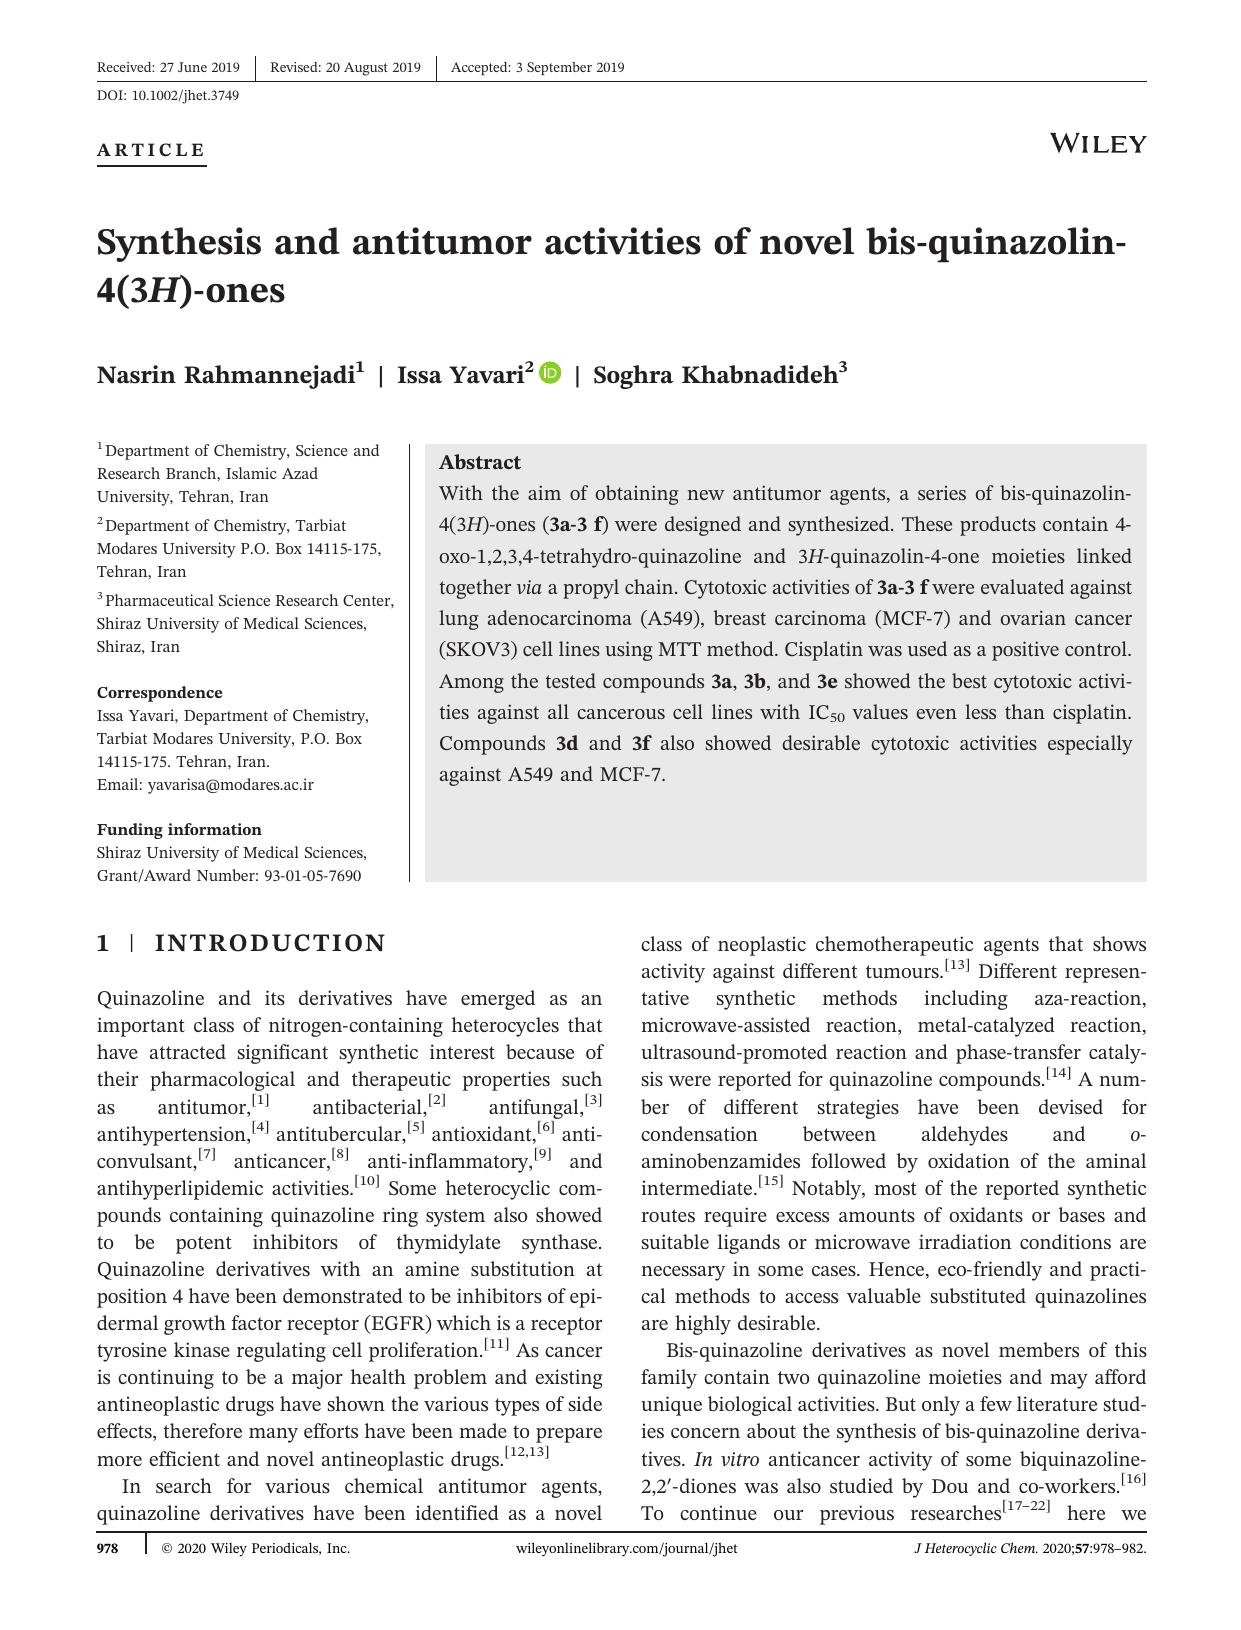 Synthesis and antitumor activities of novel bisâquinazolinâ4(3H)âones by Nasrin Rahmannejadi Issa Yavari Soghra Khabnadideh